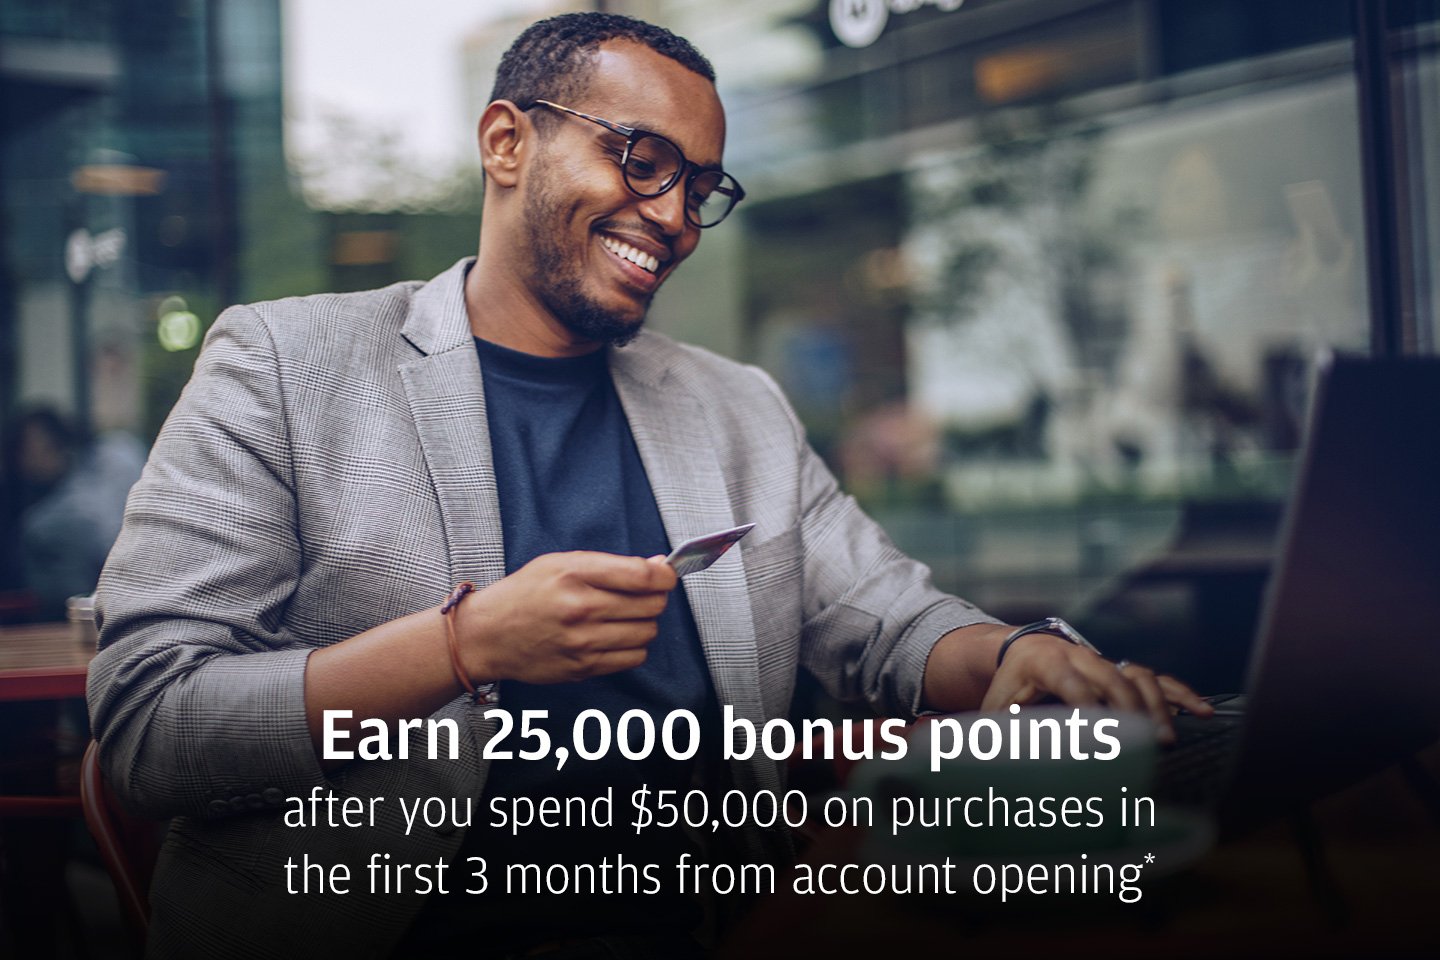 Earn 25,000 bonus points after you spend $50,000 on purchases in the first 3 months from account opening*